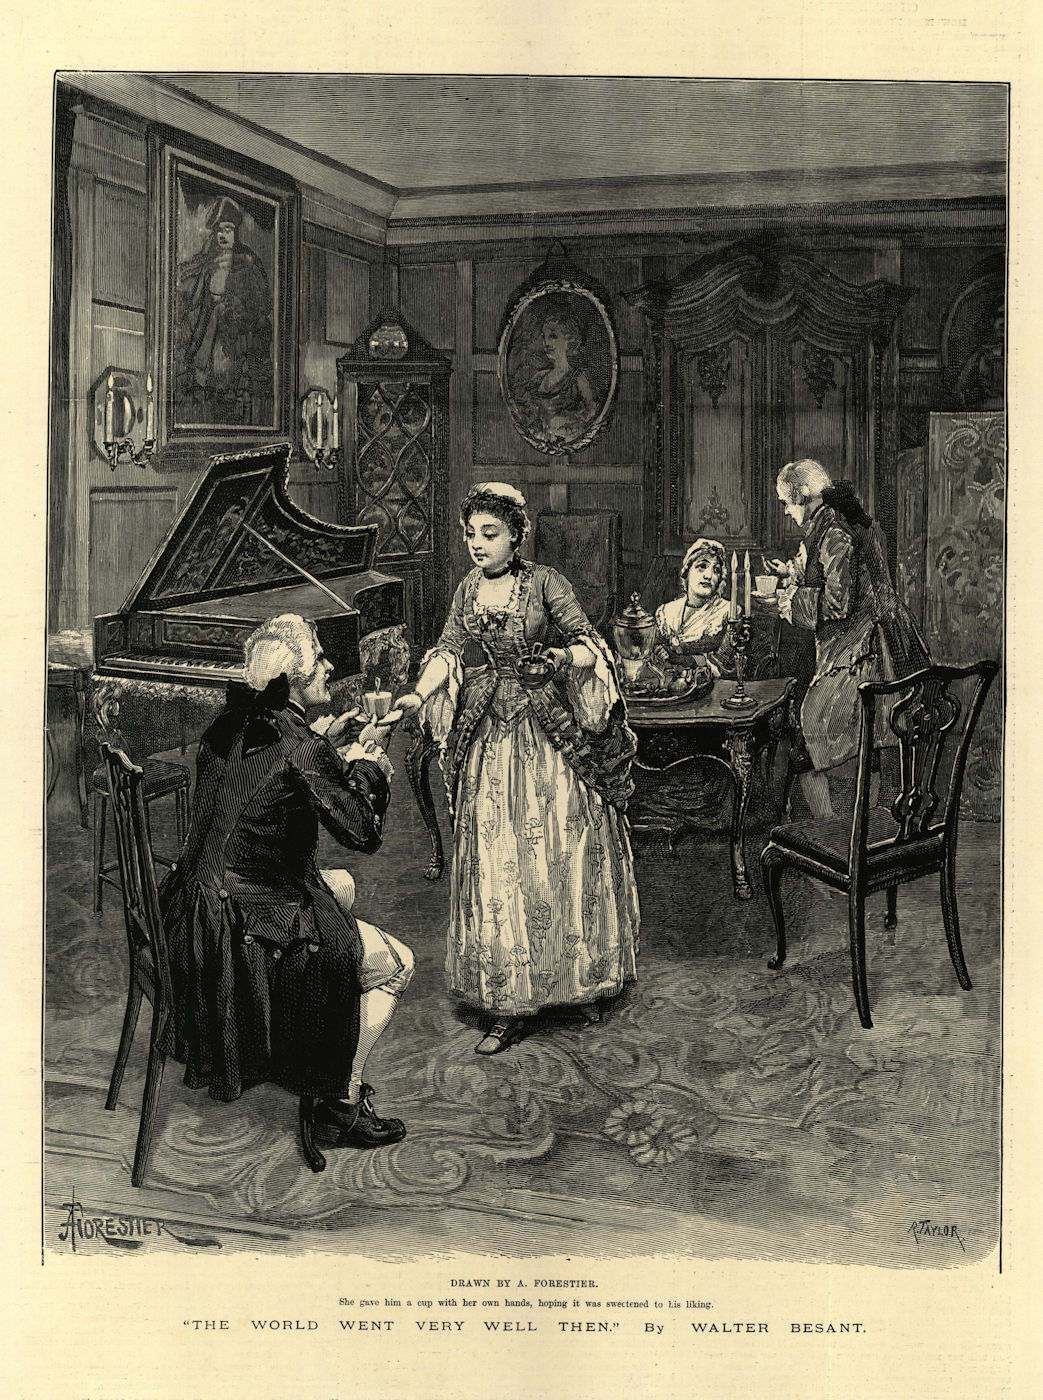 Associate Product The World went very well then, by Walter Besant. Grand piano. 1886 old print